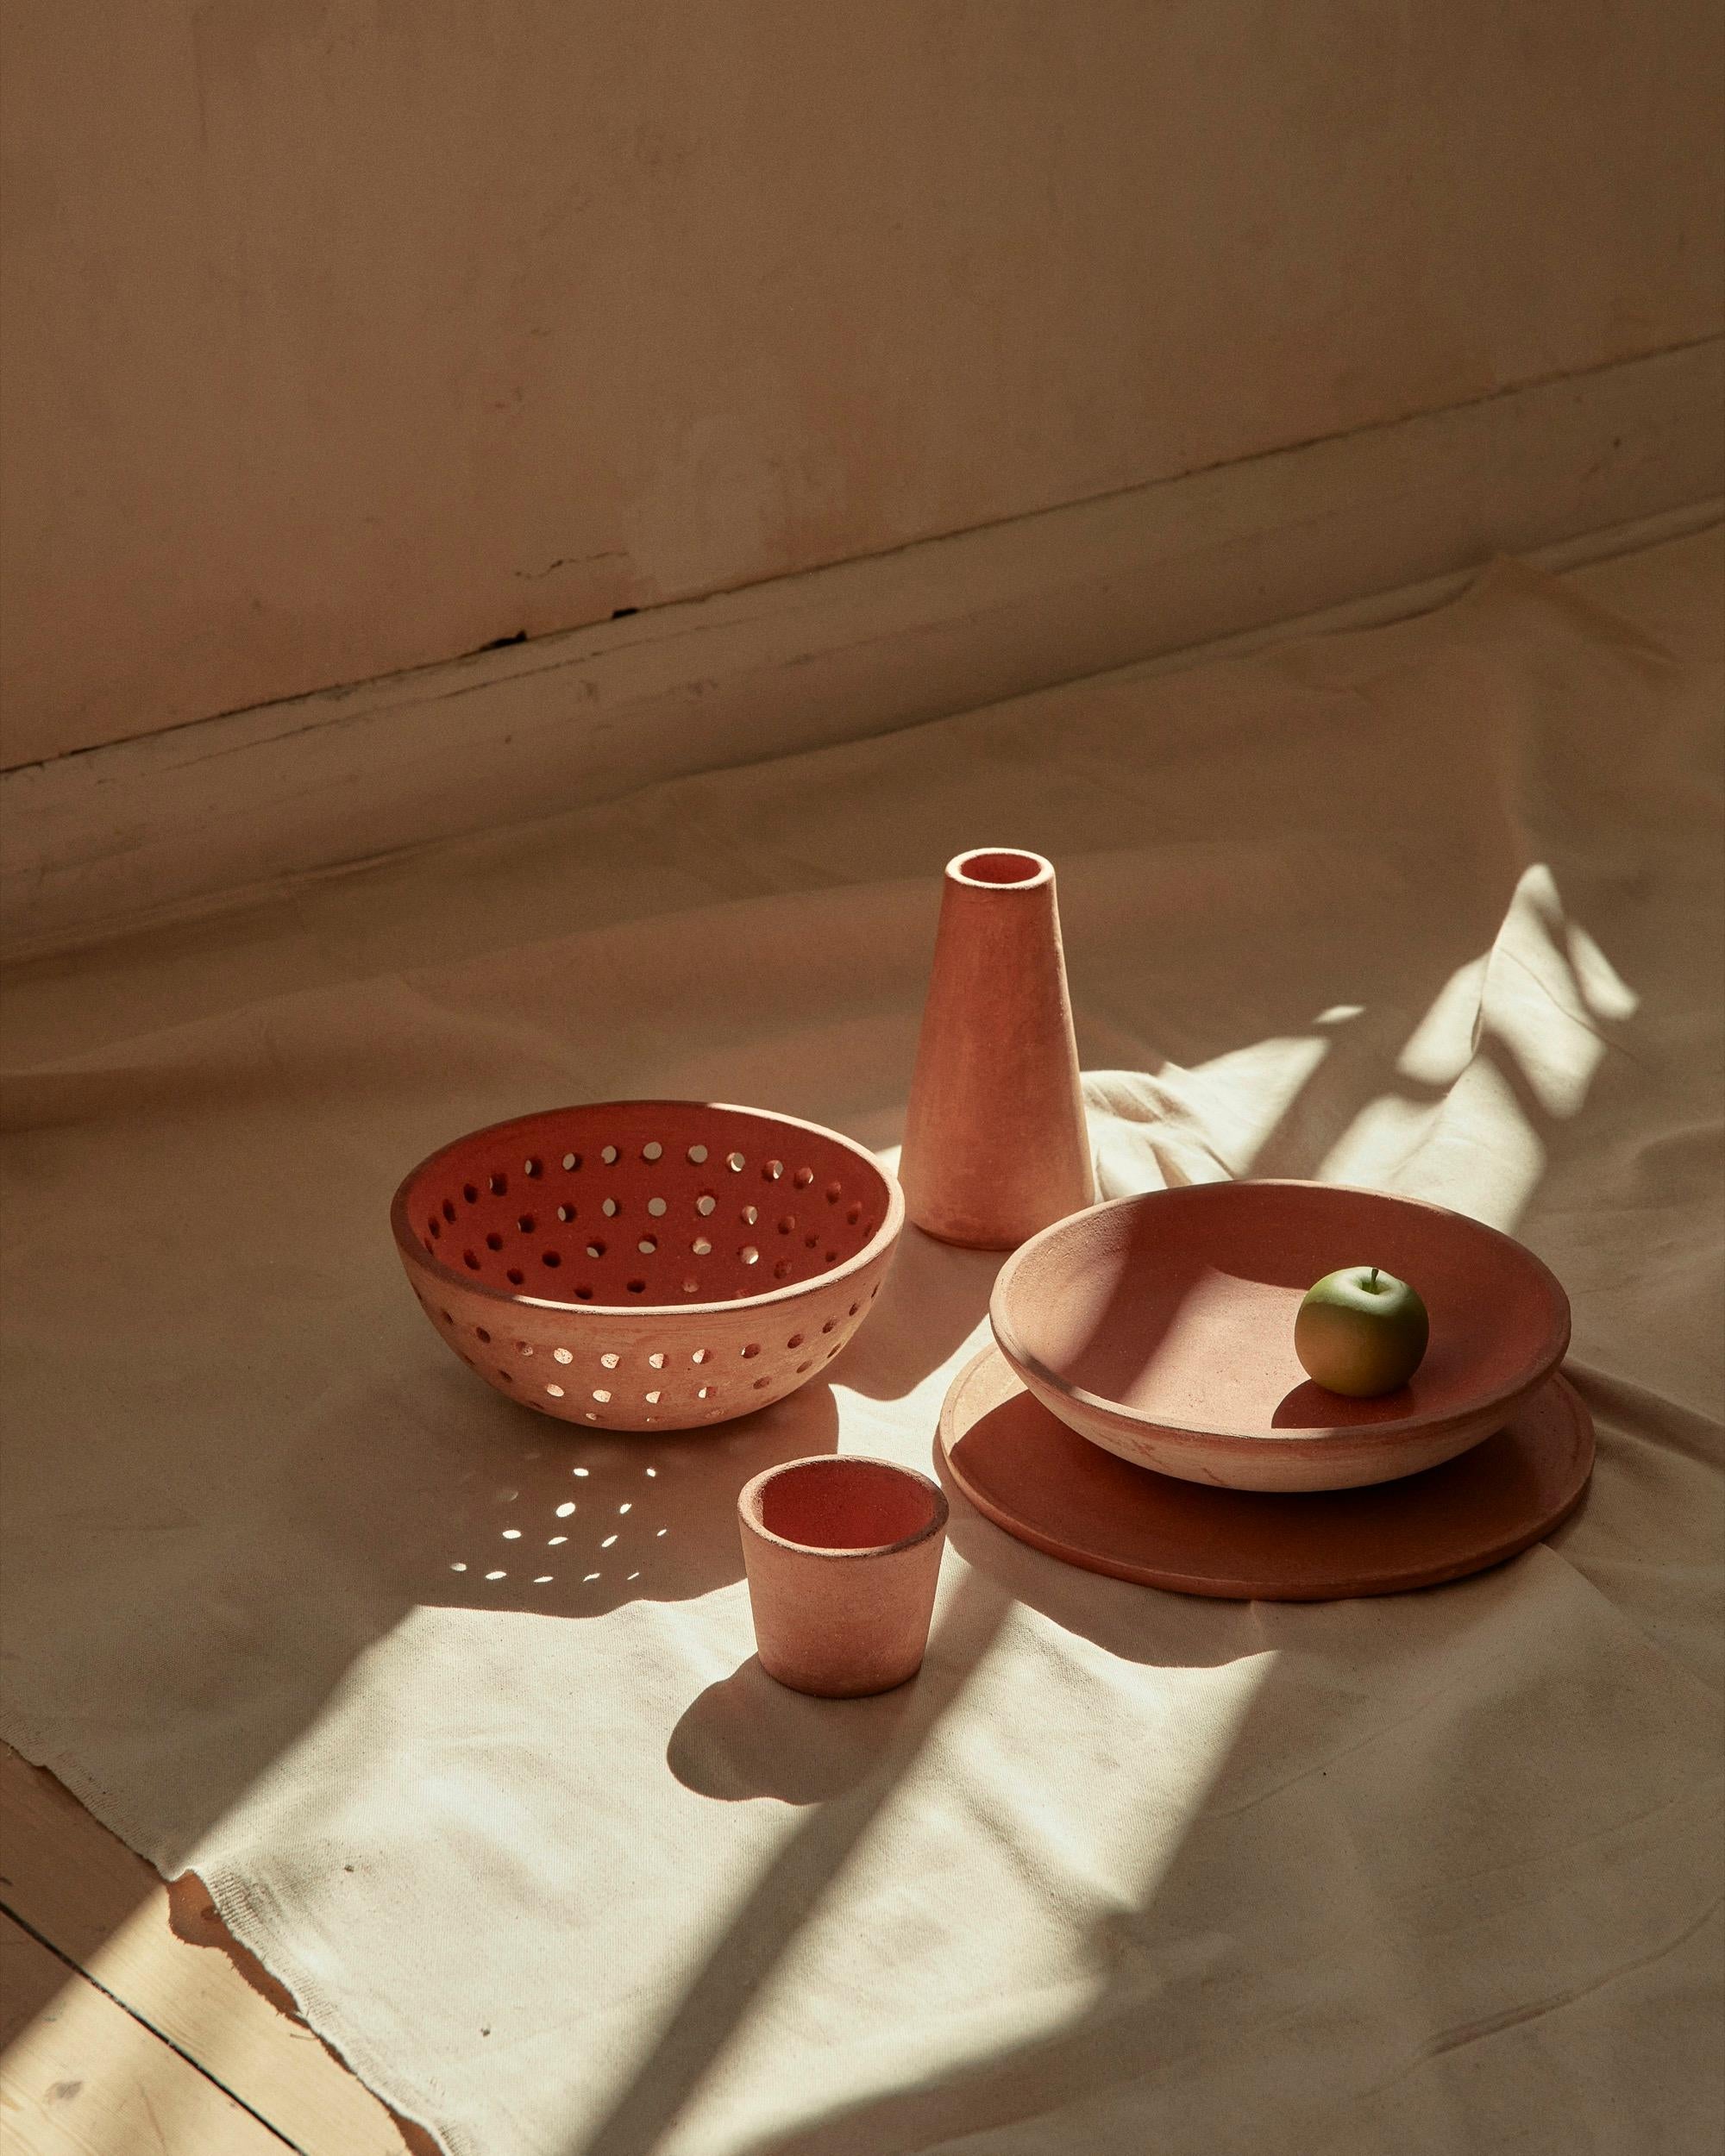 A modular design consisting of five individual pieces that can be combined to create a tabletop sprout planter or used alone or in different combinations as a cake stand, serving plates, a dinner set or colander.

Collections for the home and